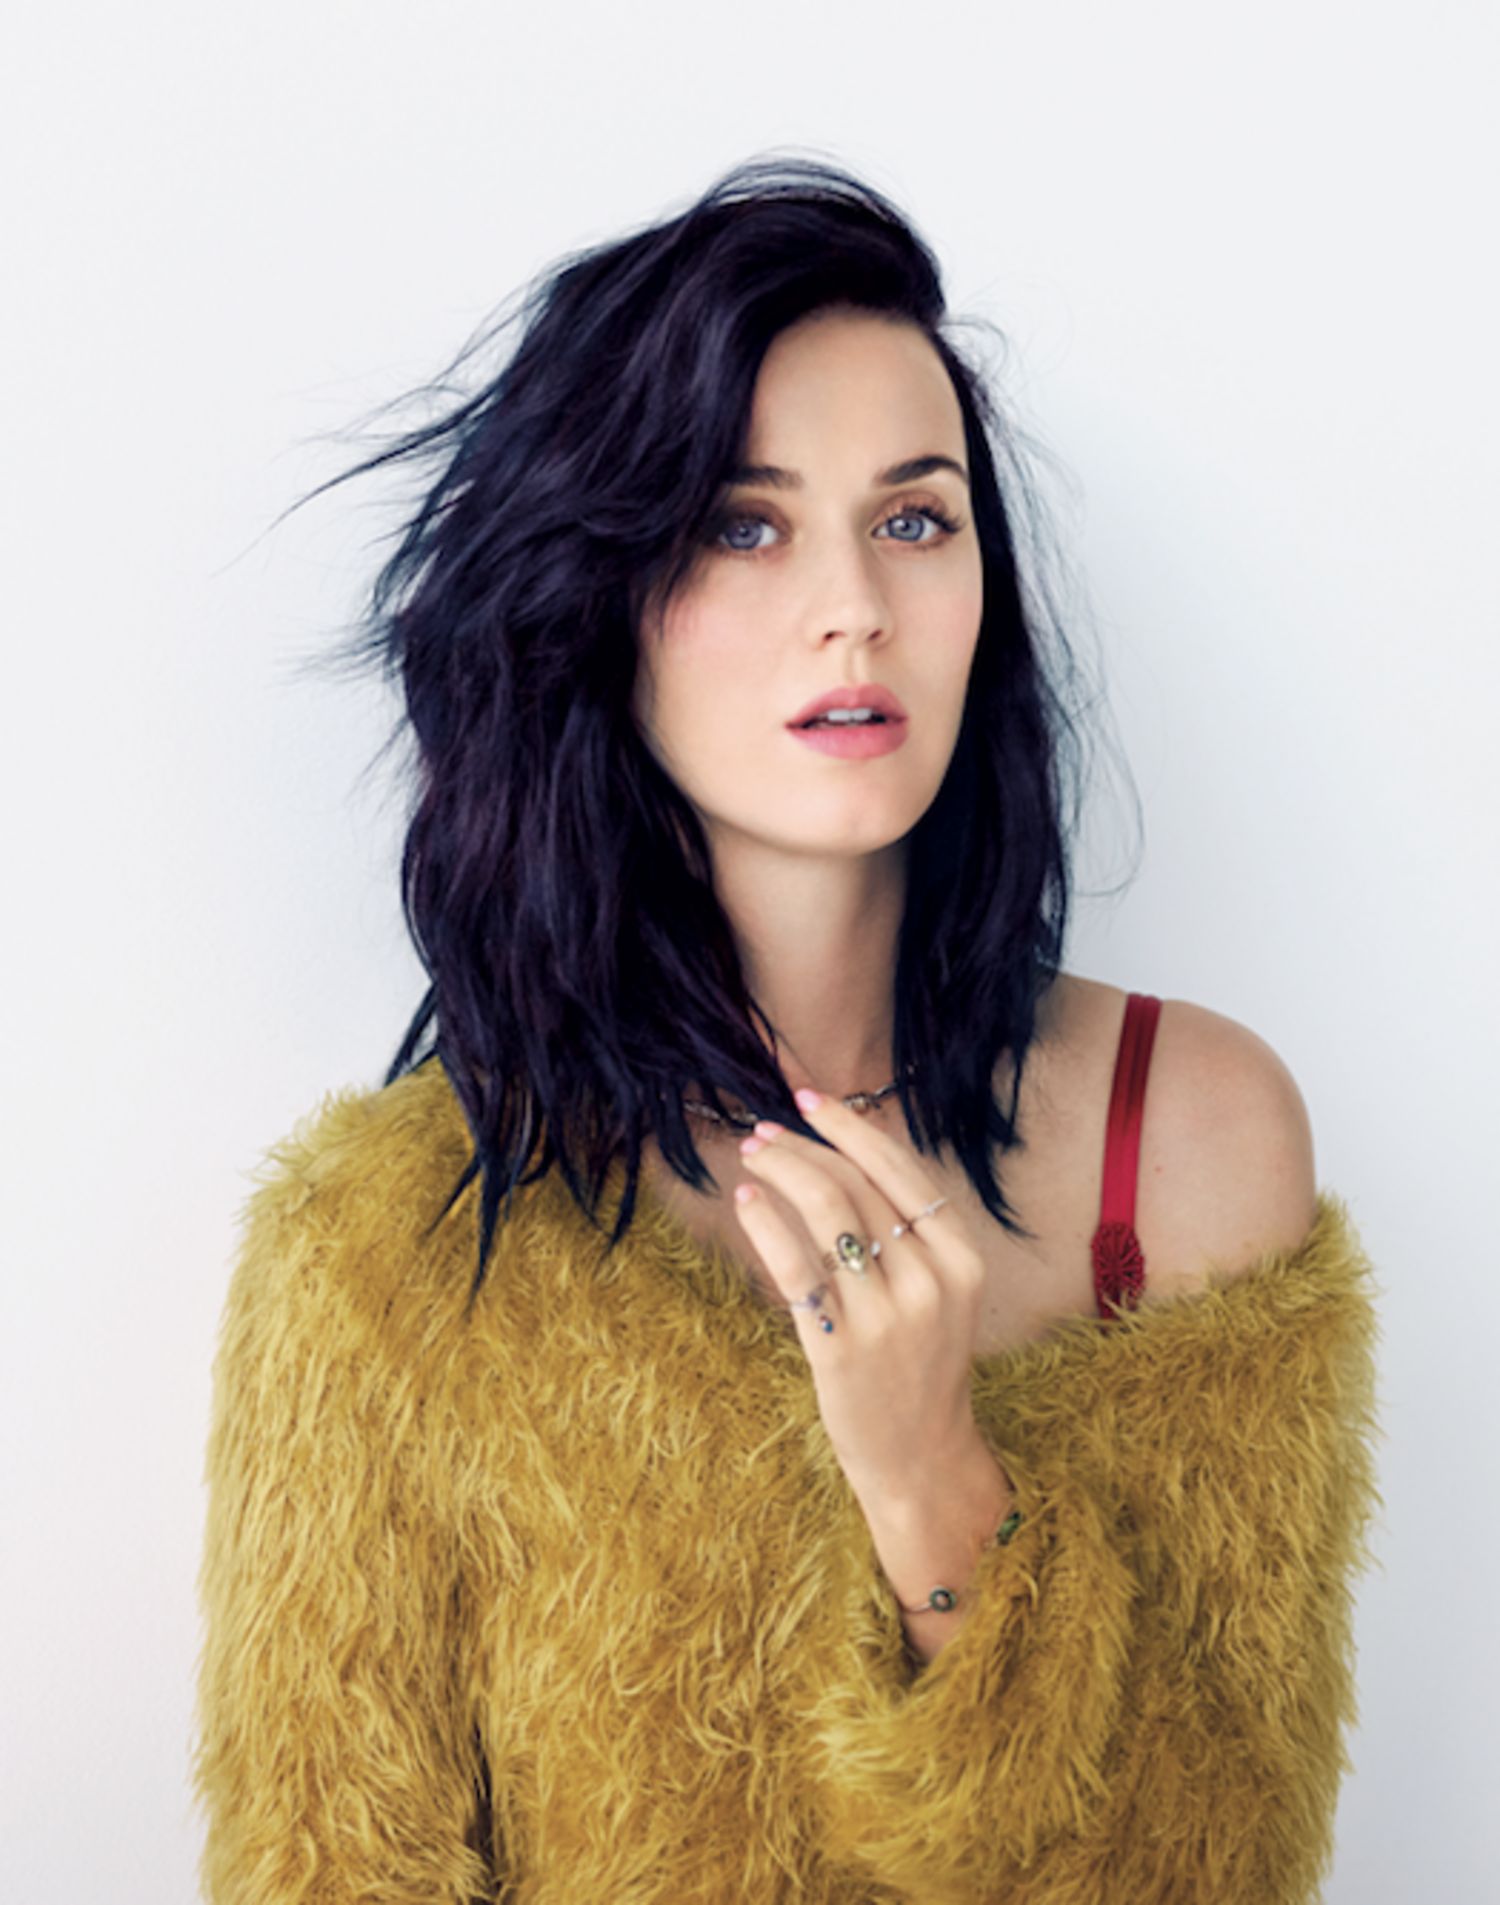 Katy Perry Small Talk Portrait Wallpapers